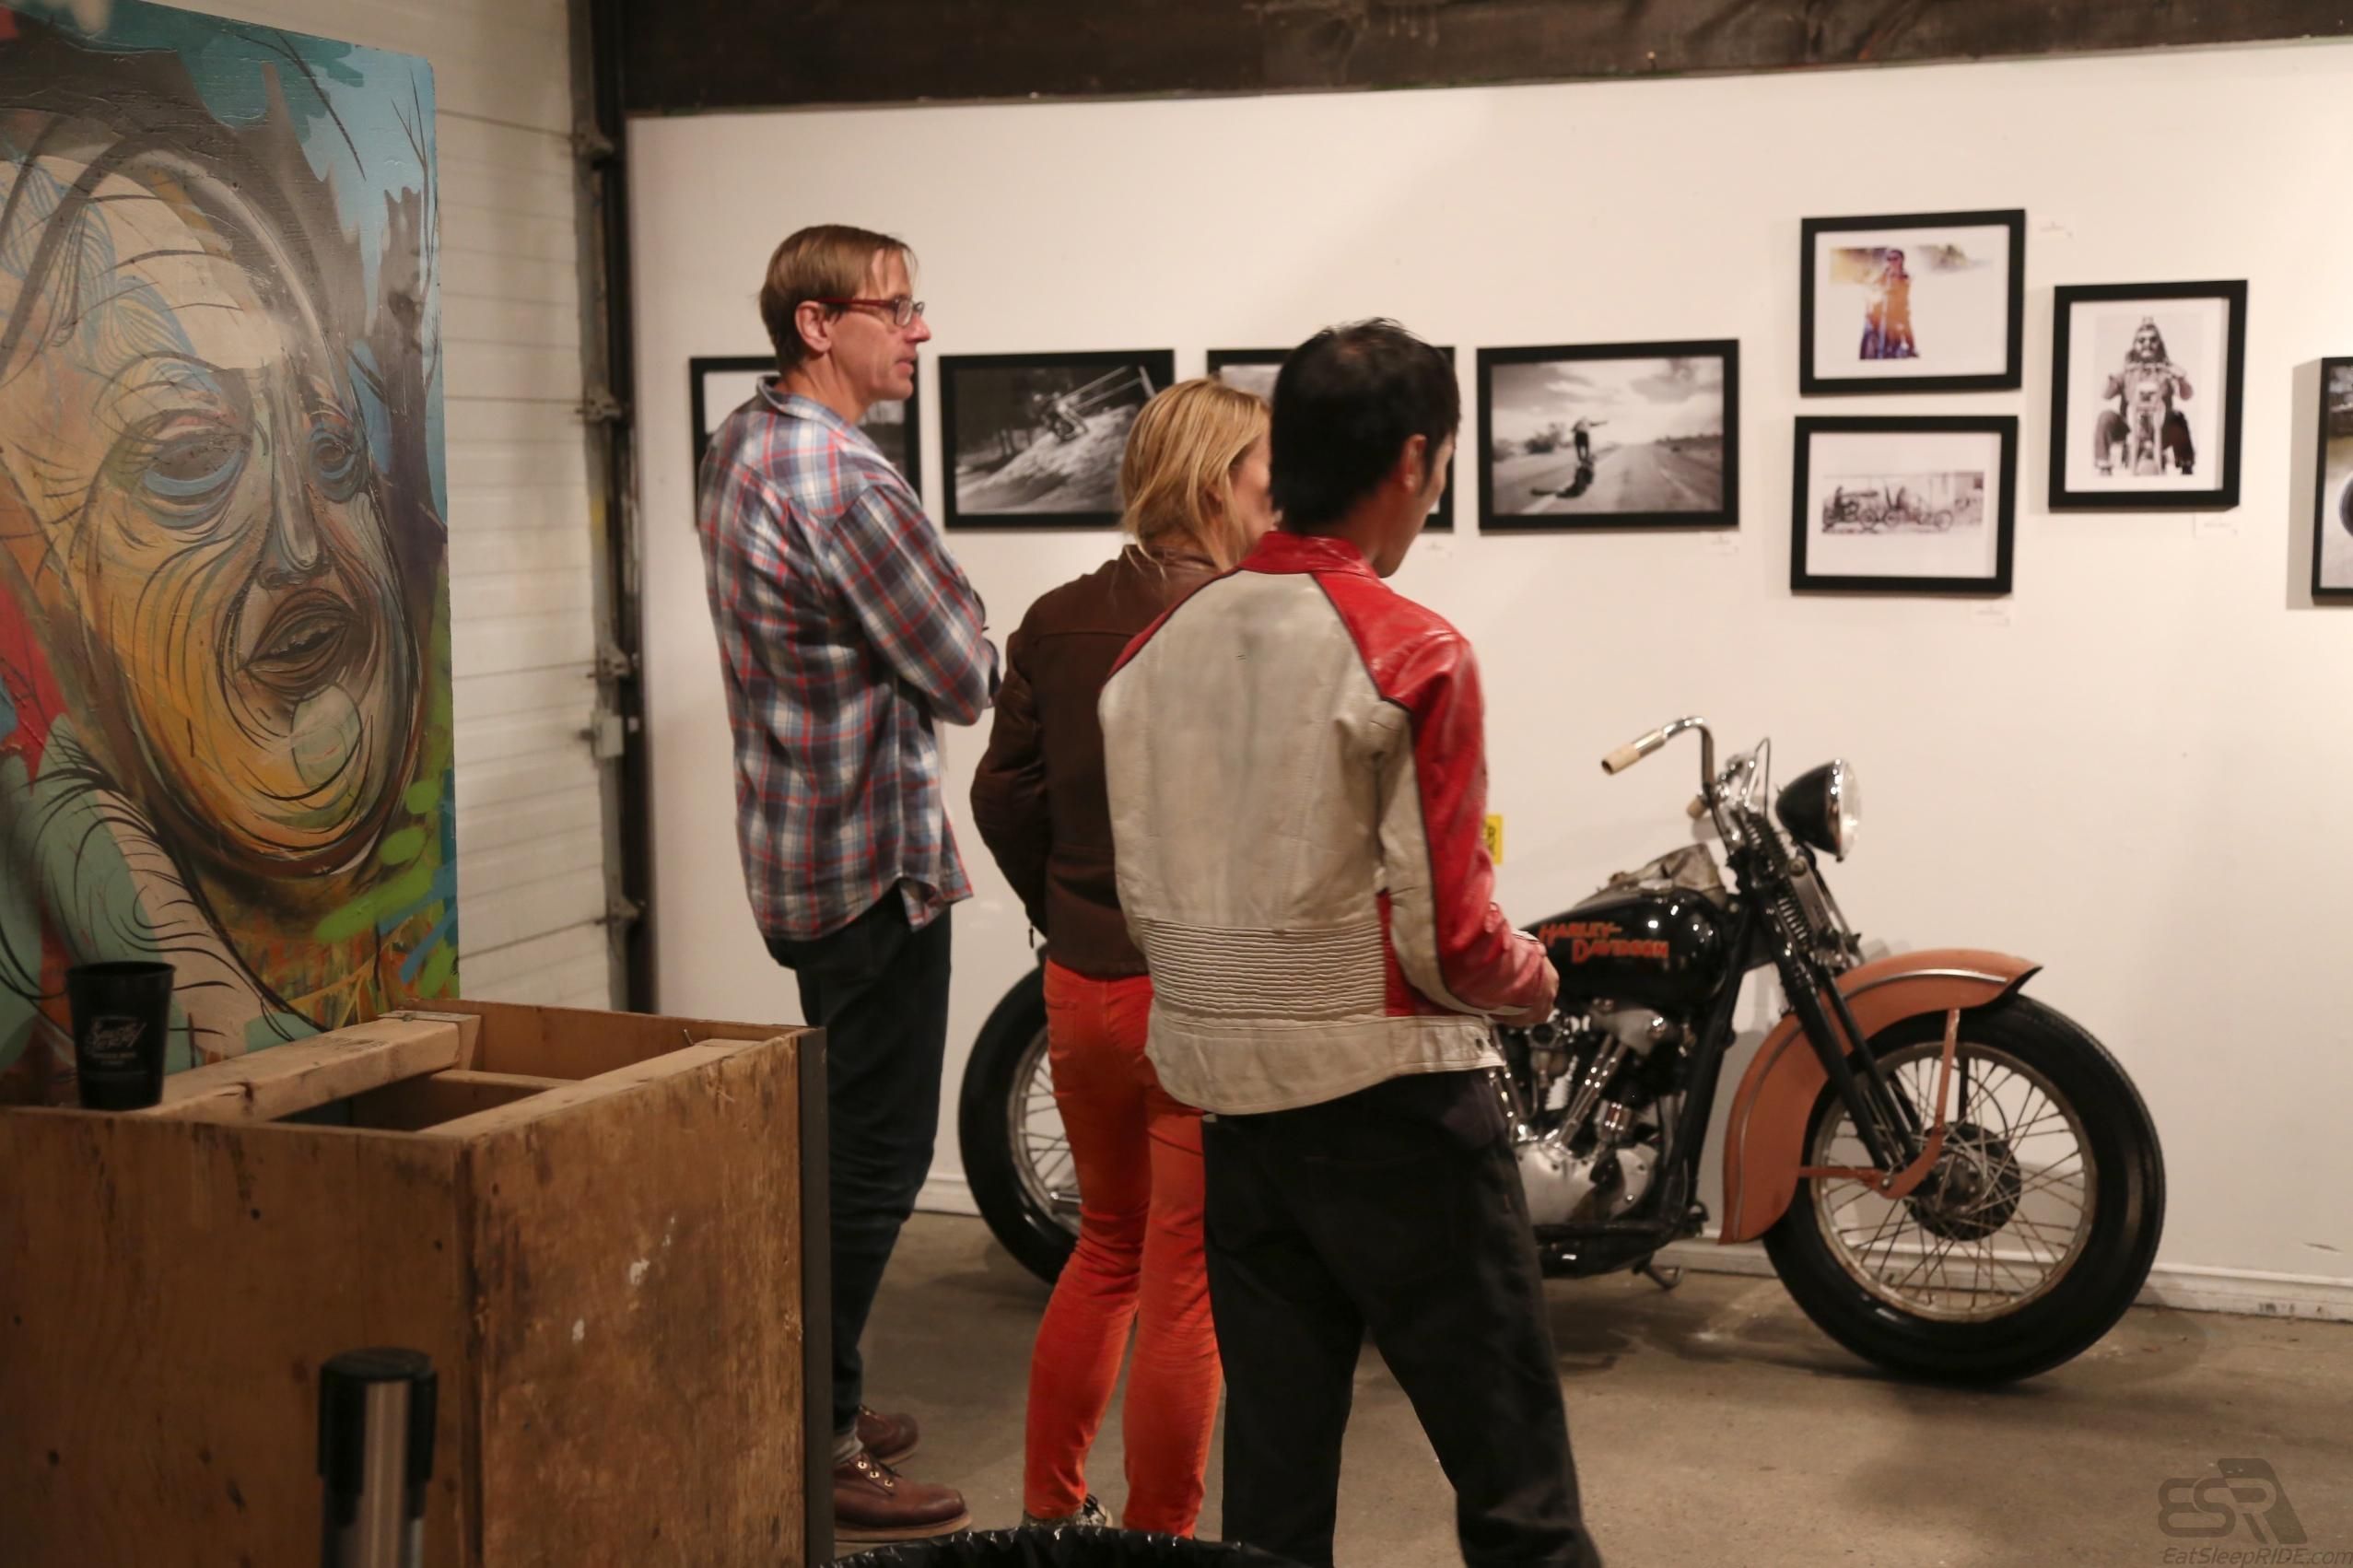 Jason Parker's 1939 Knucklehead post-war Harley at the Soul Seekers art & photo show